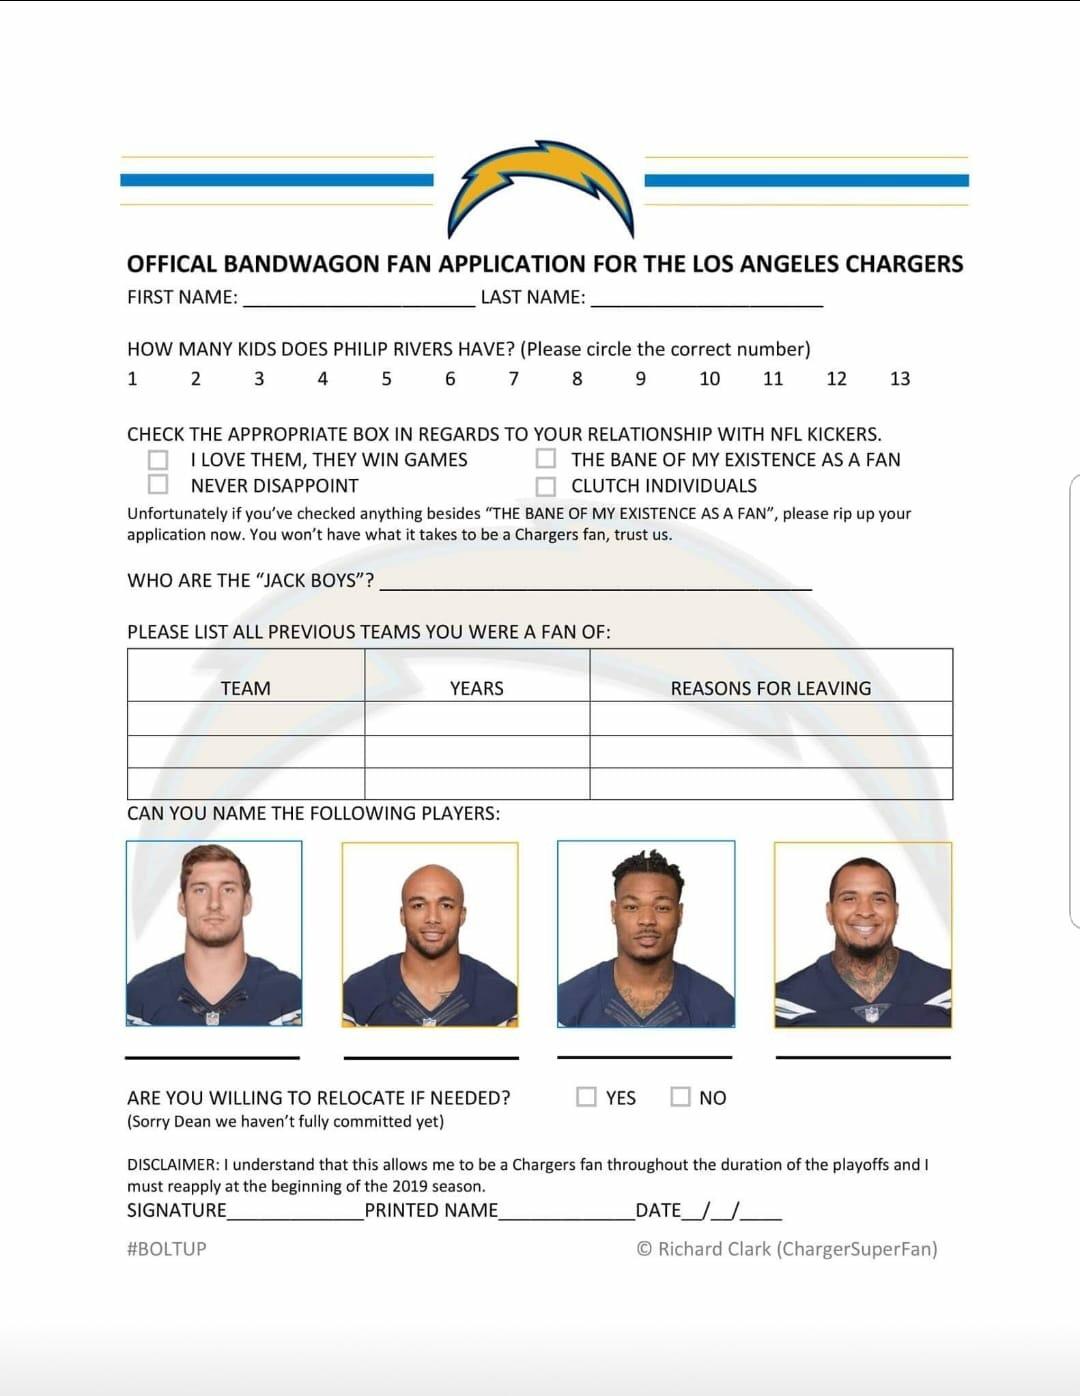 Have you filled out your Los Angeles Chargers' bandwagon application?